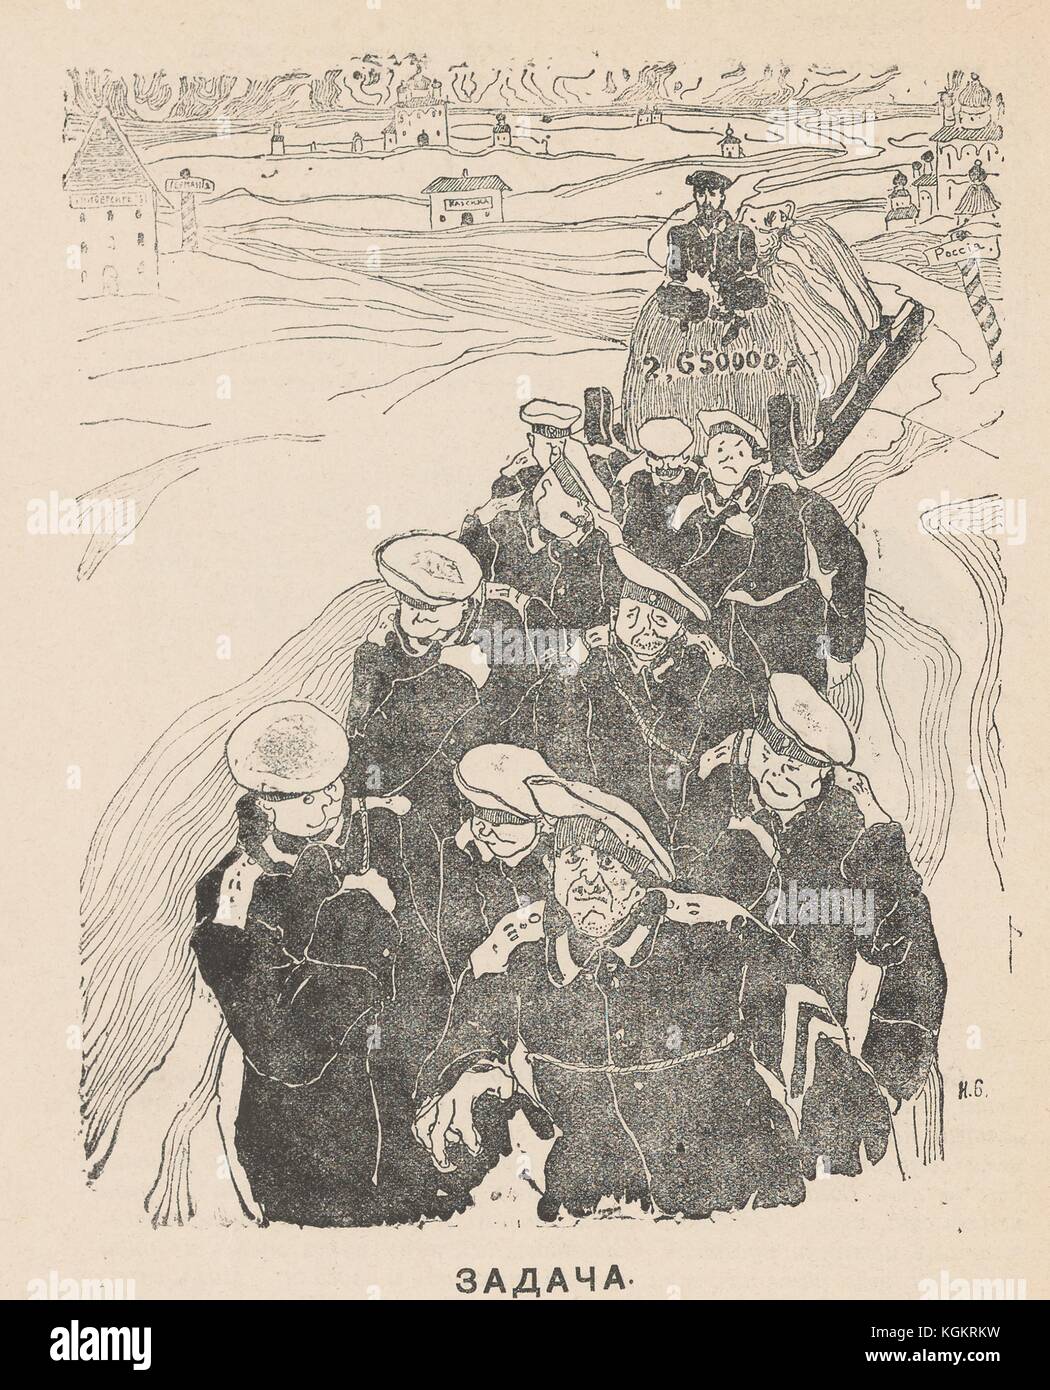 Illustration from the Russian satirical journal Plamia (Flame) depicting soldiers walking away from a village while pulling a wooden sled carrying large money-filled sacks with '2, 650, 000 rubles' written on them; An official or higher-ranking soldier is sitting on top of one of the sacks of money, and there is a sign behind them that says 'Russia', with text below reading 'Task', 1905. Stock Photo